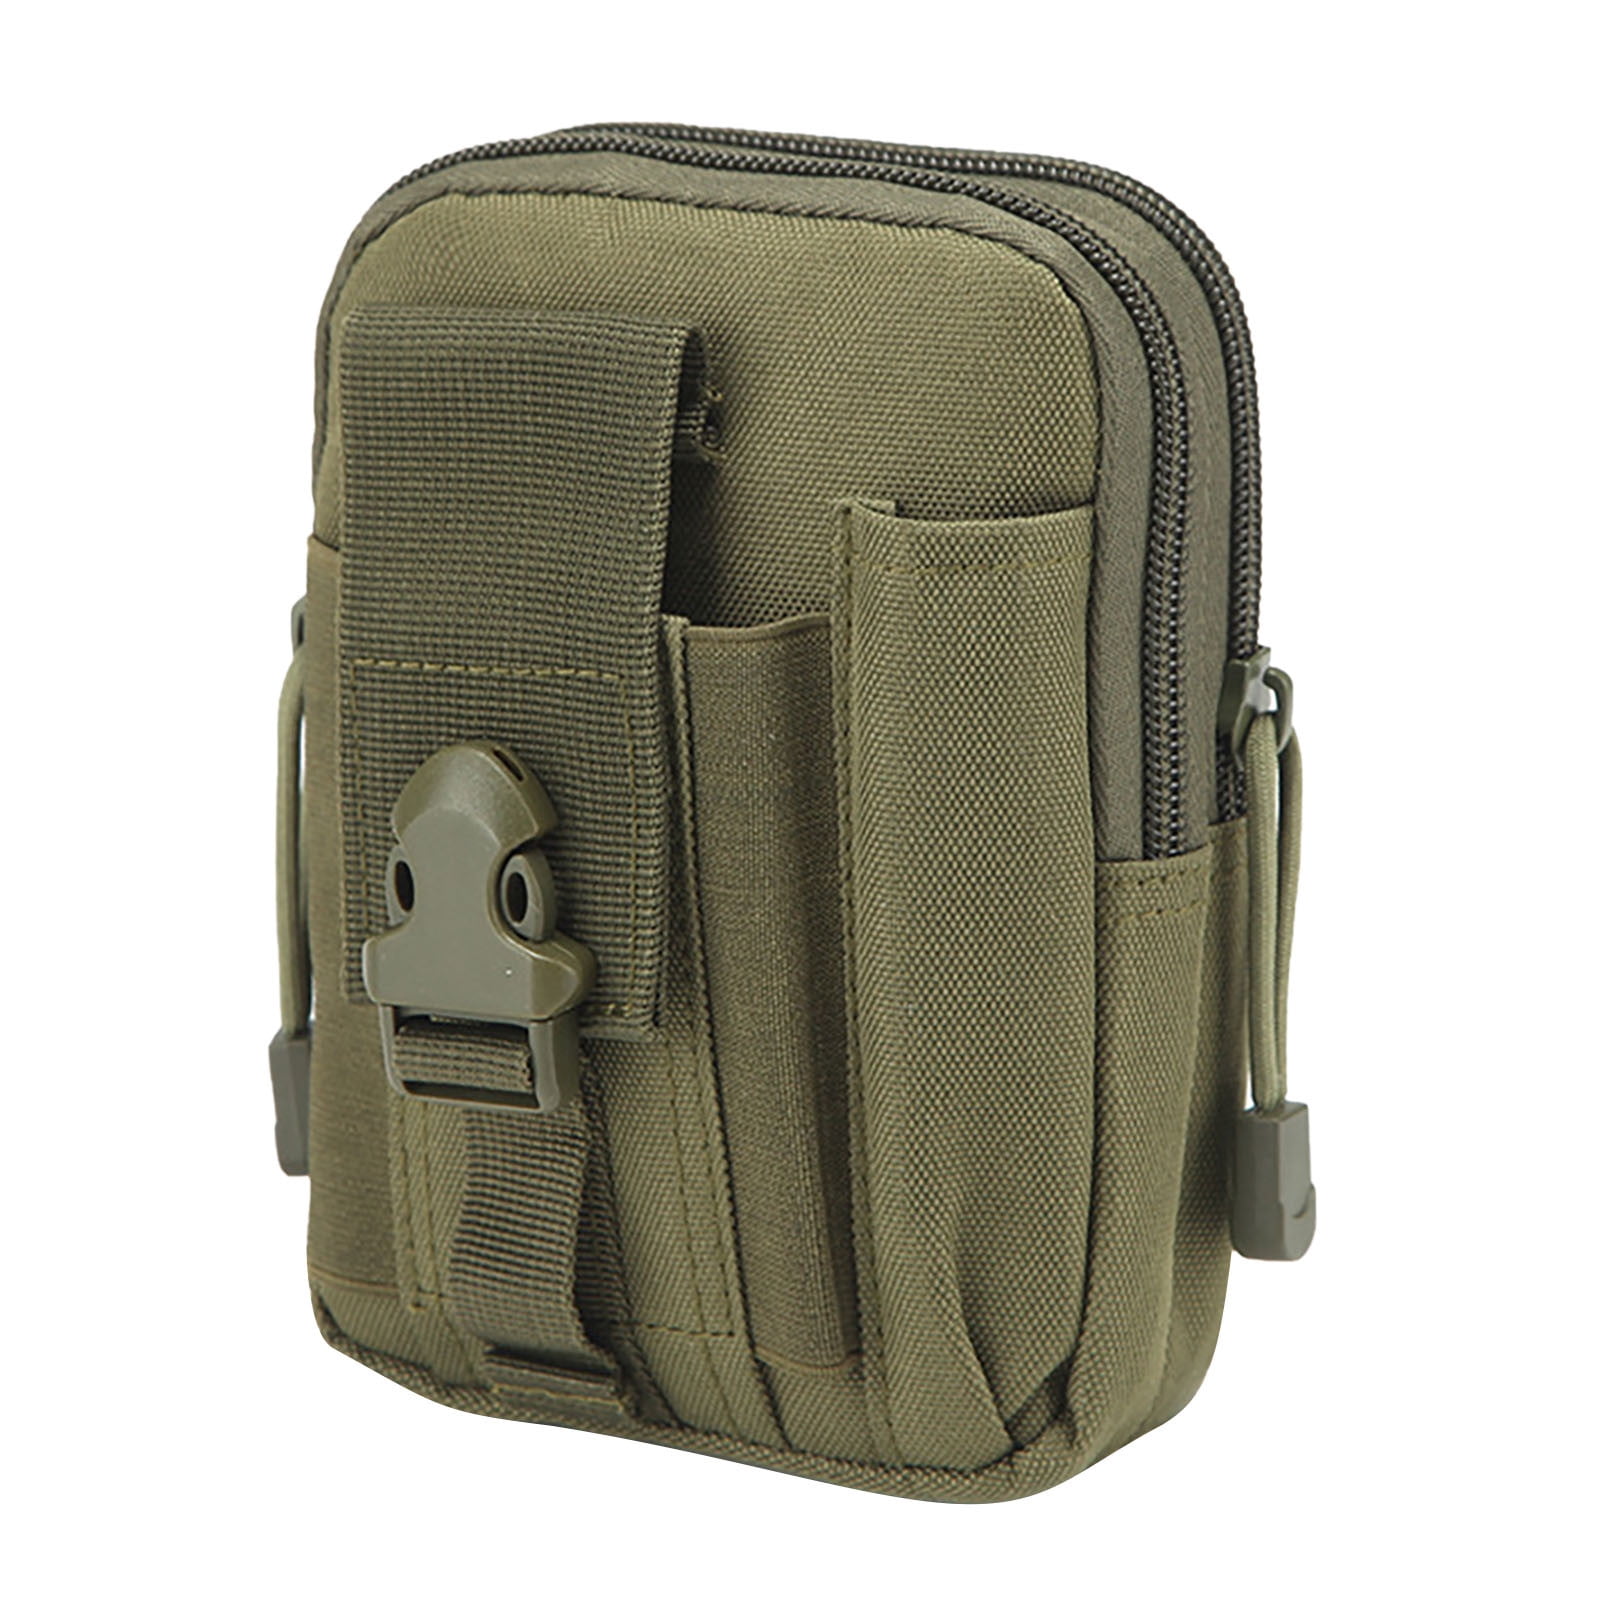 Outdoor Waist Chest Sling Bag Tactical Military Backpack Sports